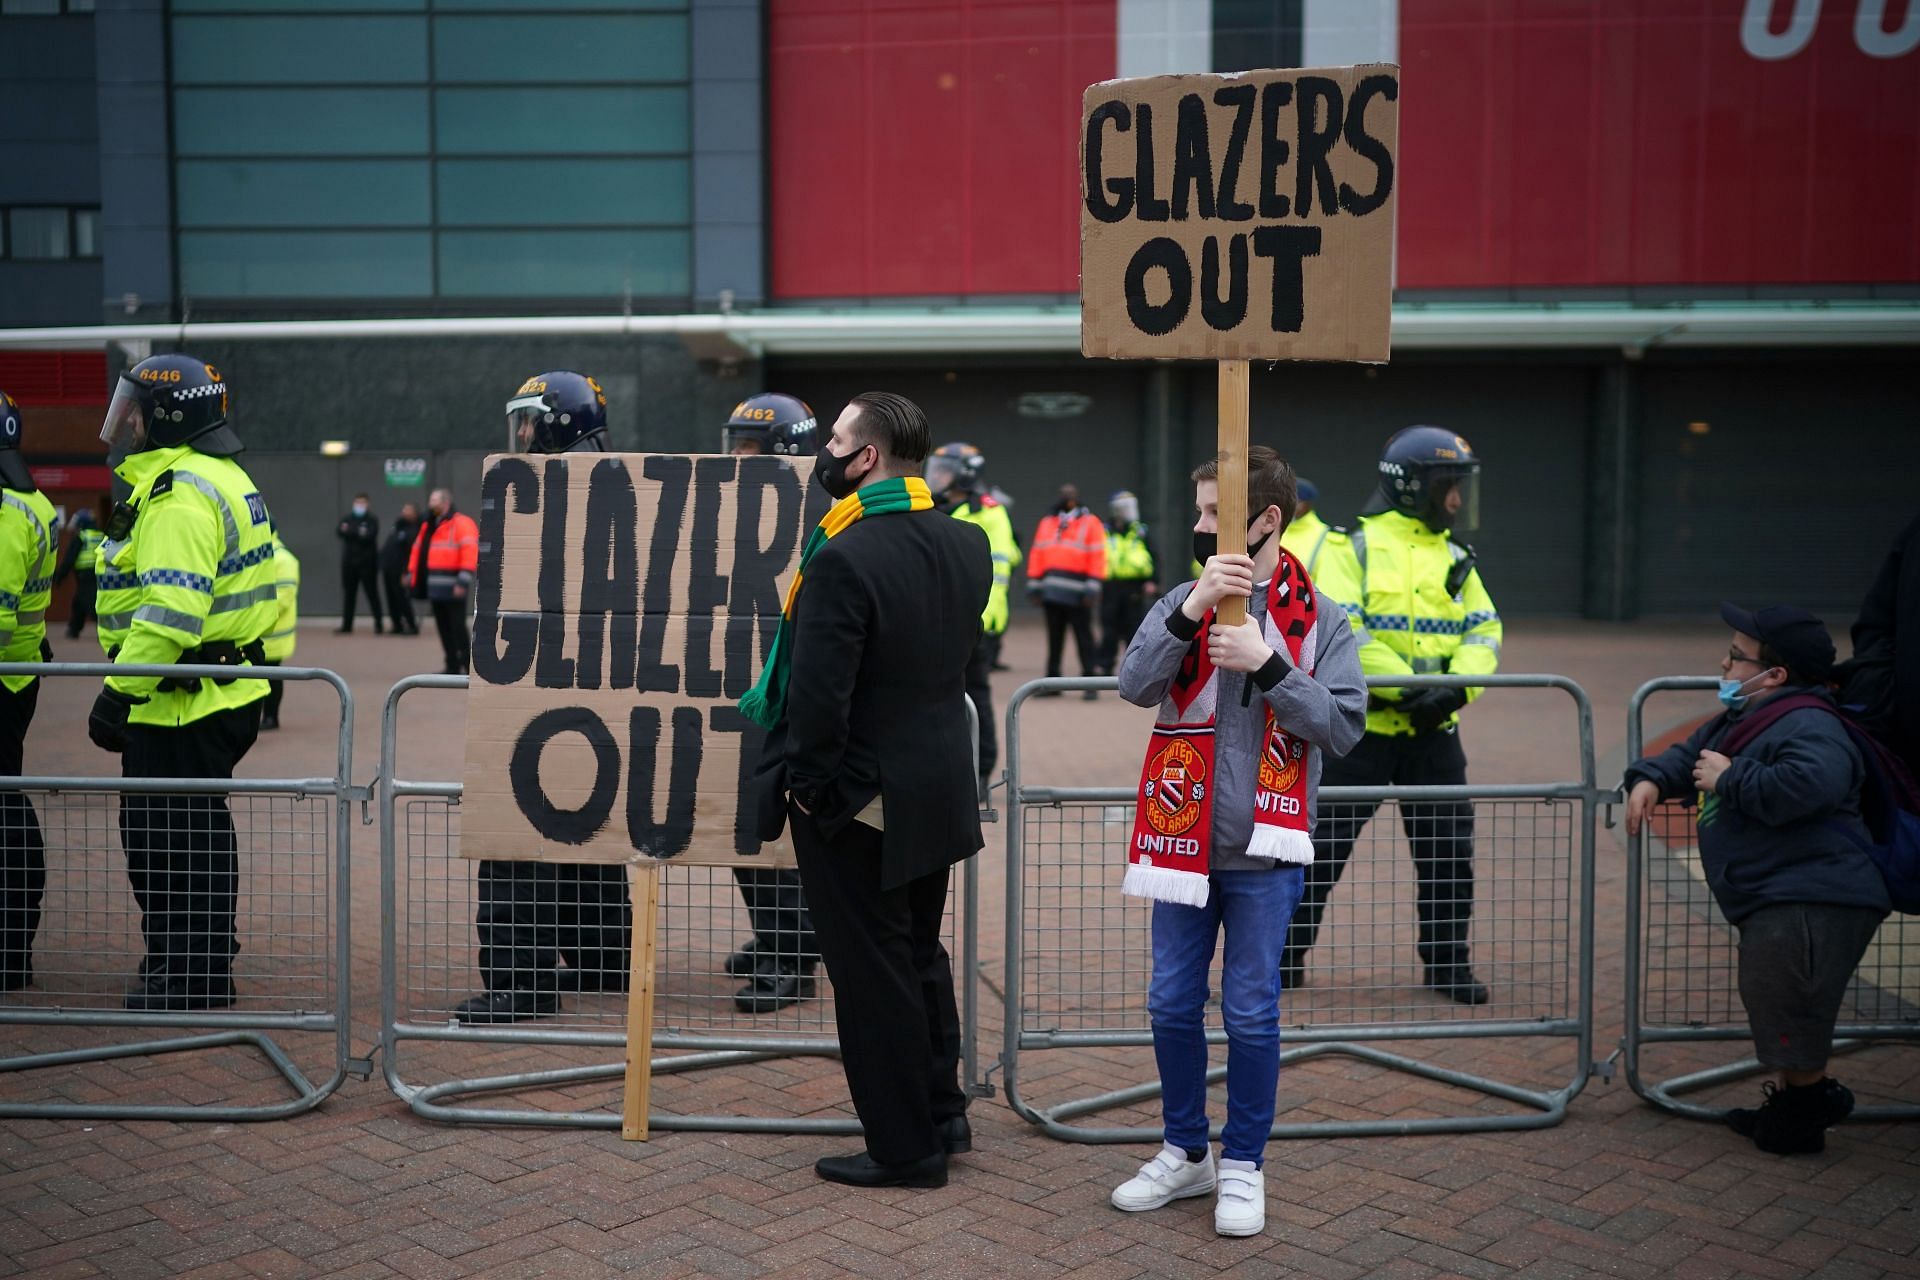 United Fans Protest Against Glazer Family Ownership